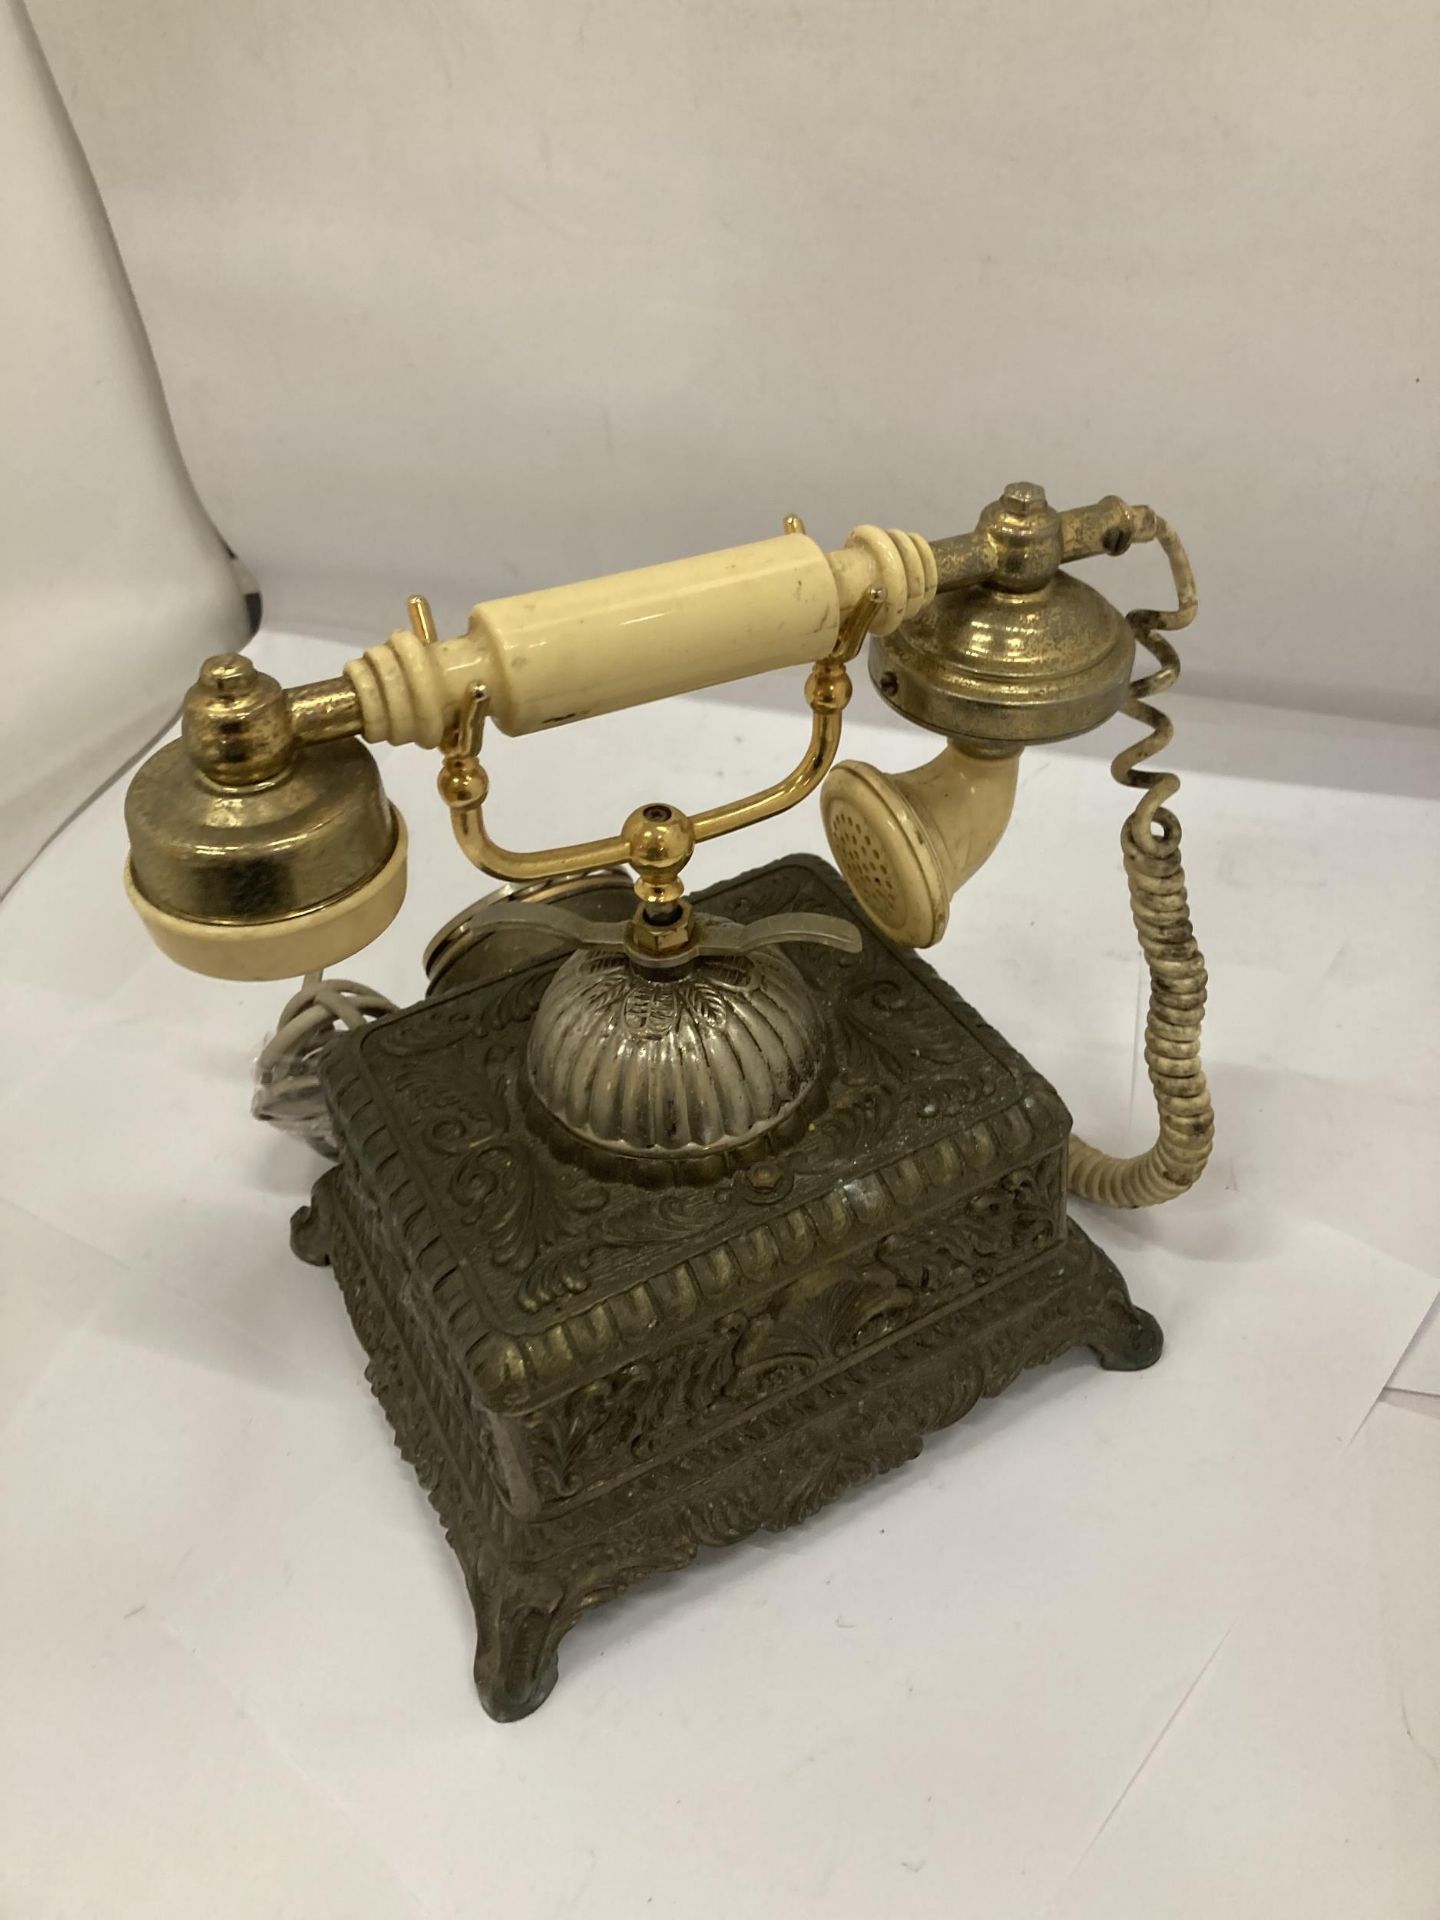 A HEAVY VINTAGE BRASS ORNATE TELEPHONE - Image 4 of 4